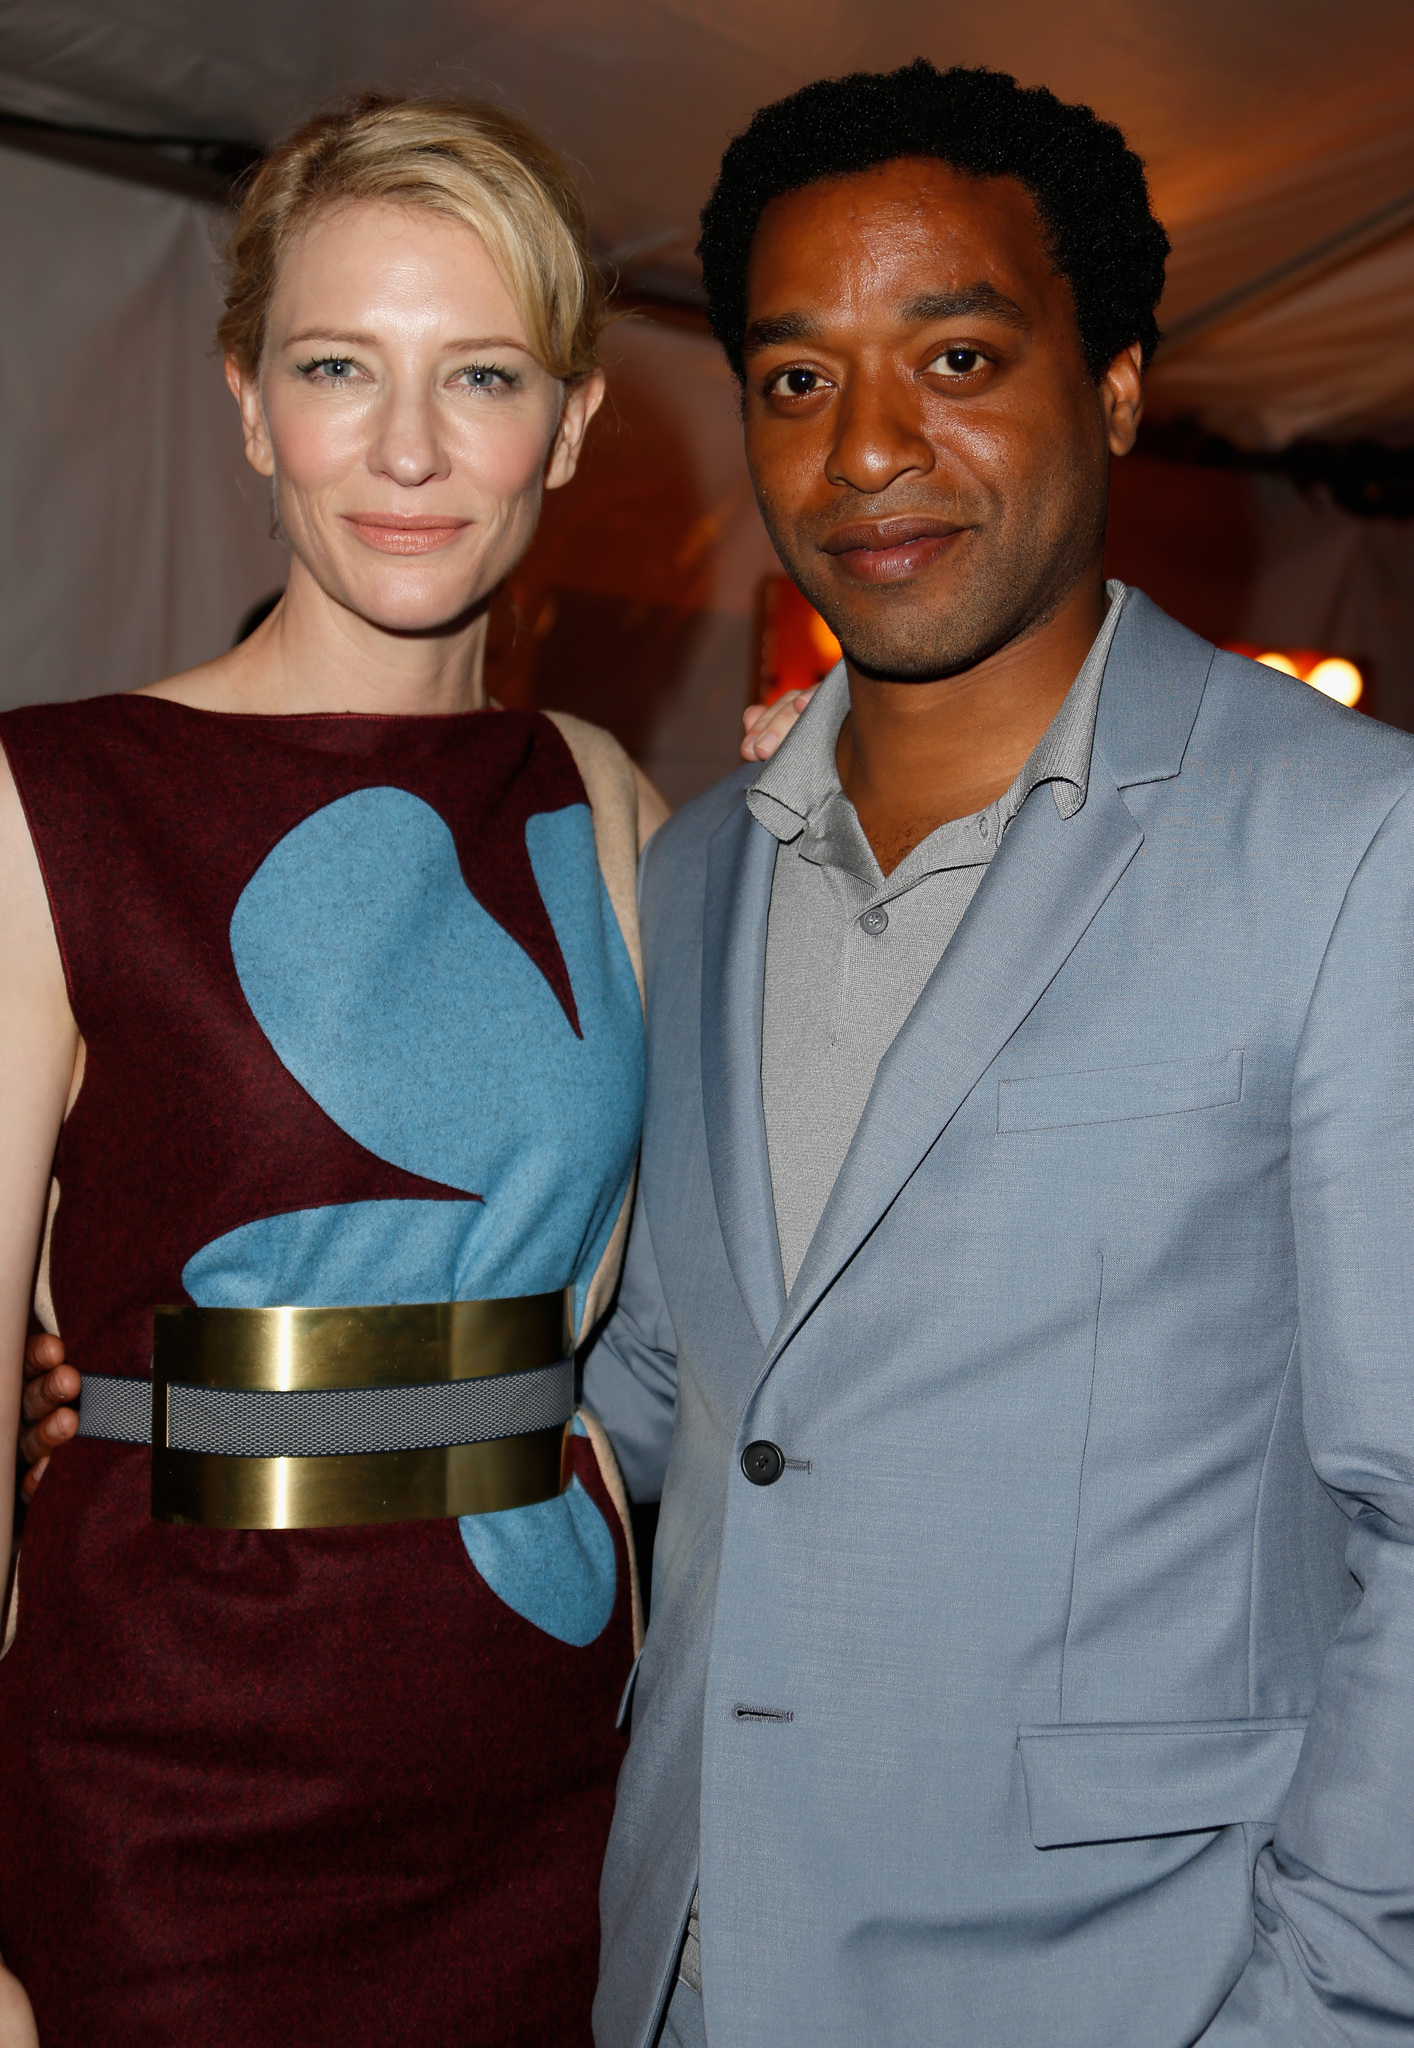 Cate Blanchett and Chiwetel Ejiofor